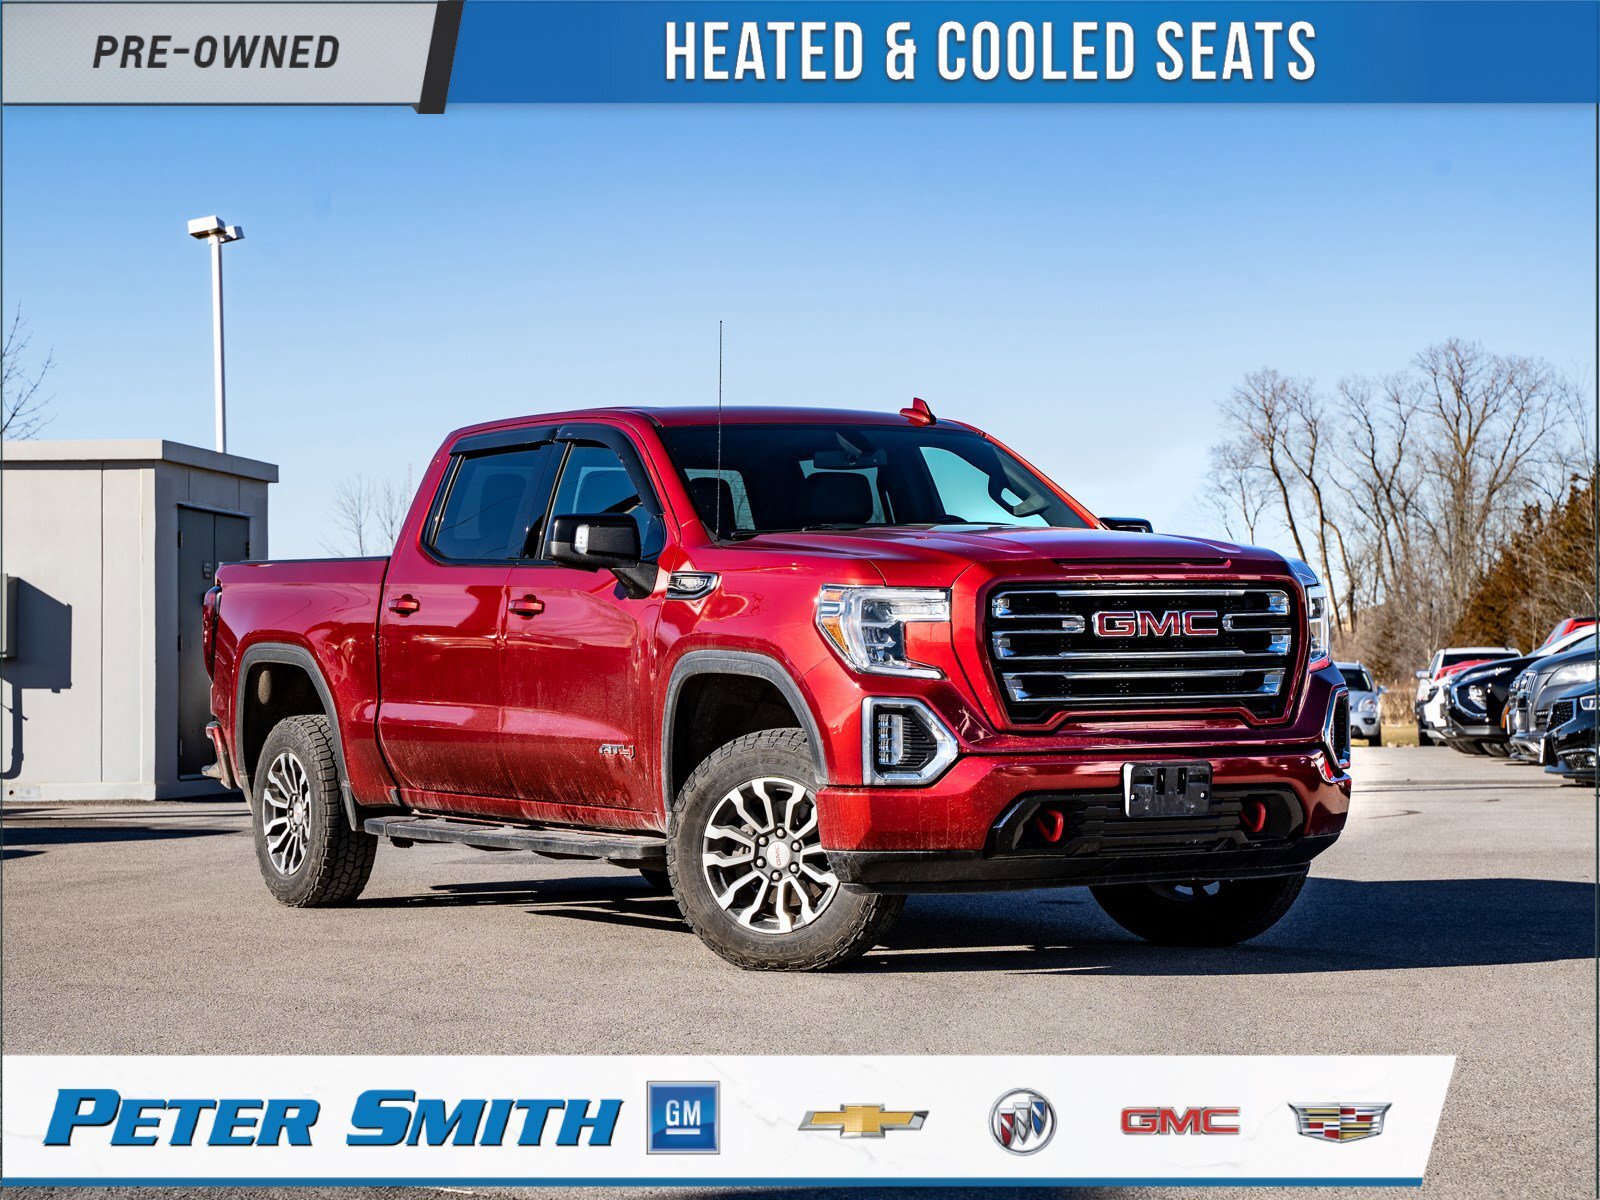 2019 GMC Sierra 1500 AT4 - 5.3L Ecotec3 V8 | Heated & Cooled Front Seat